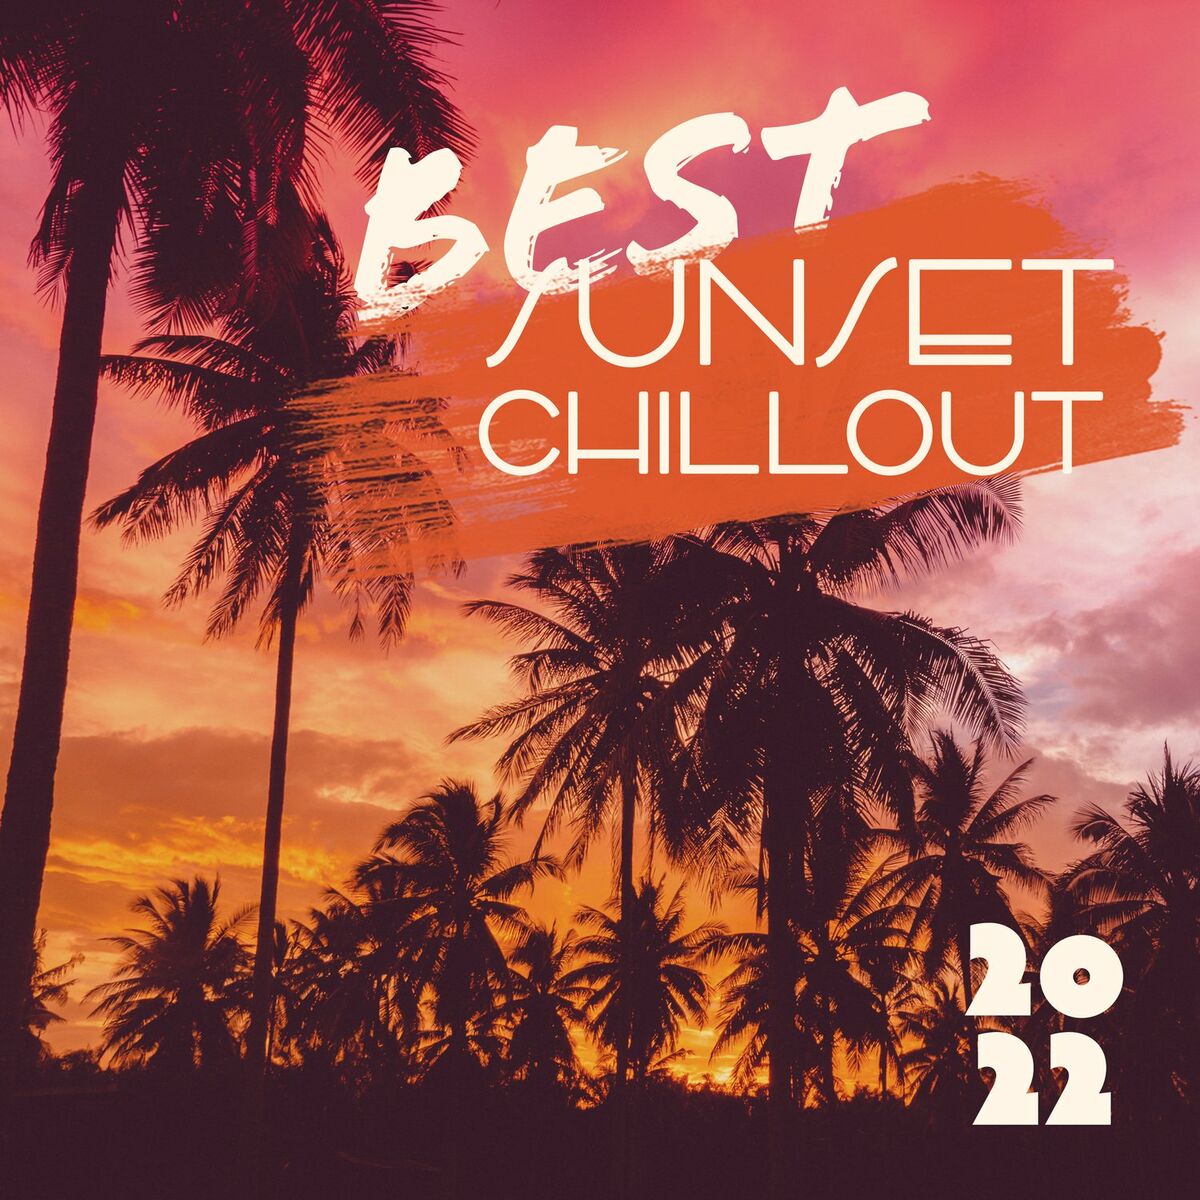 DJ Charles EDM - Best Sunset Chillout 2022: Top 100 Ibiza Beach Party  Music